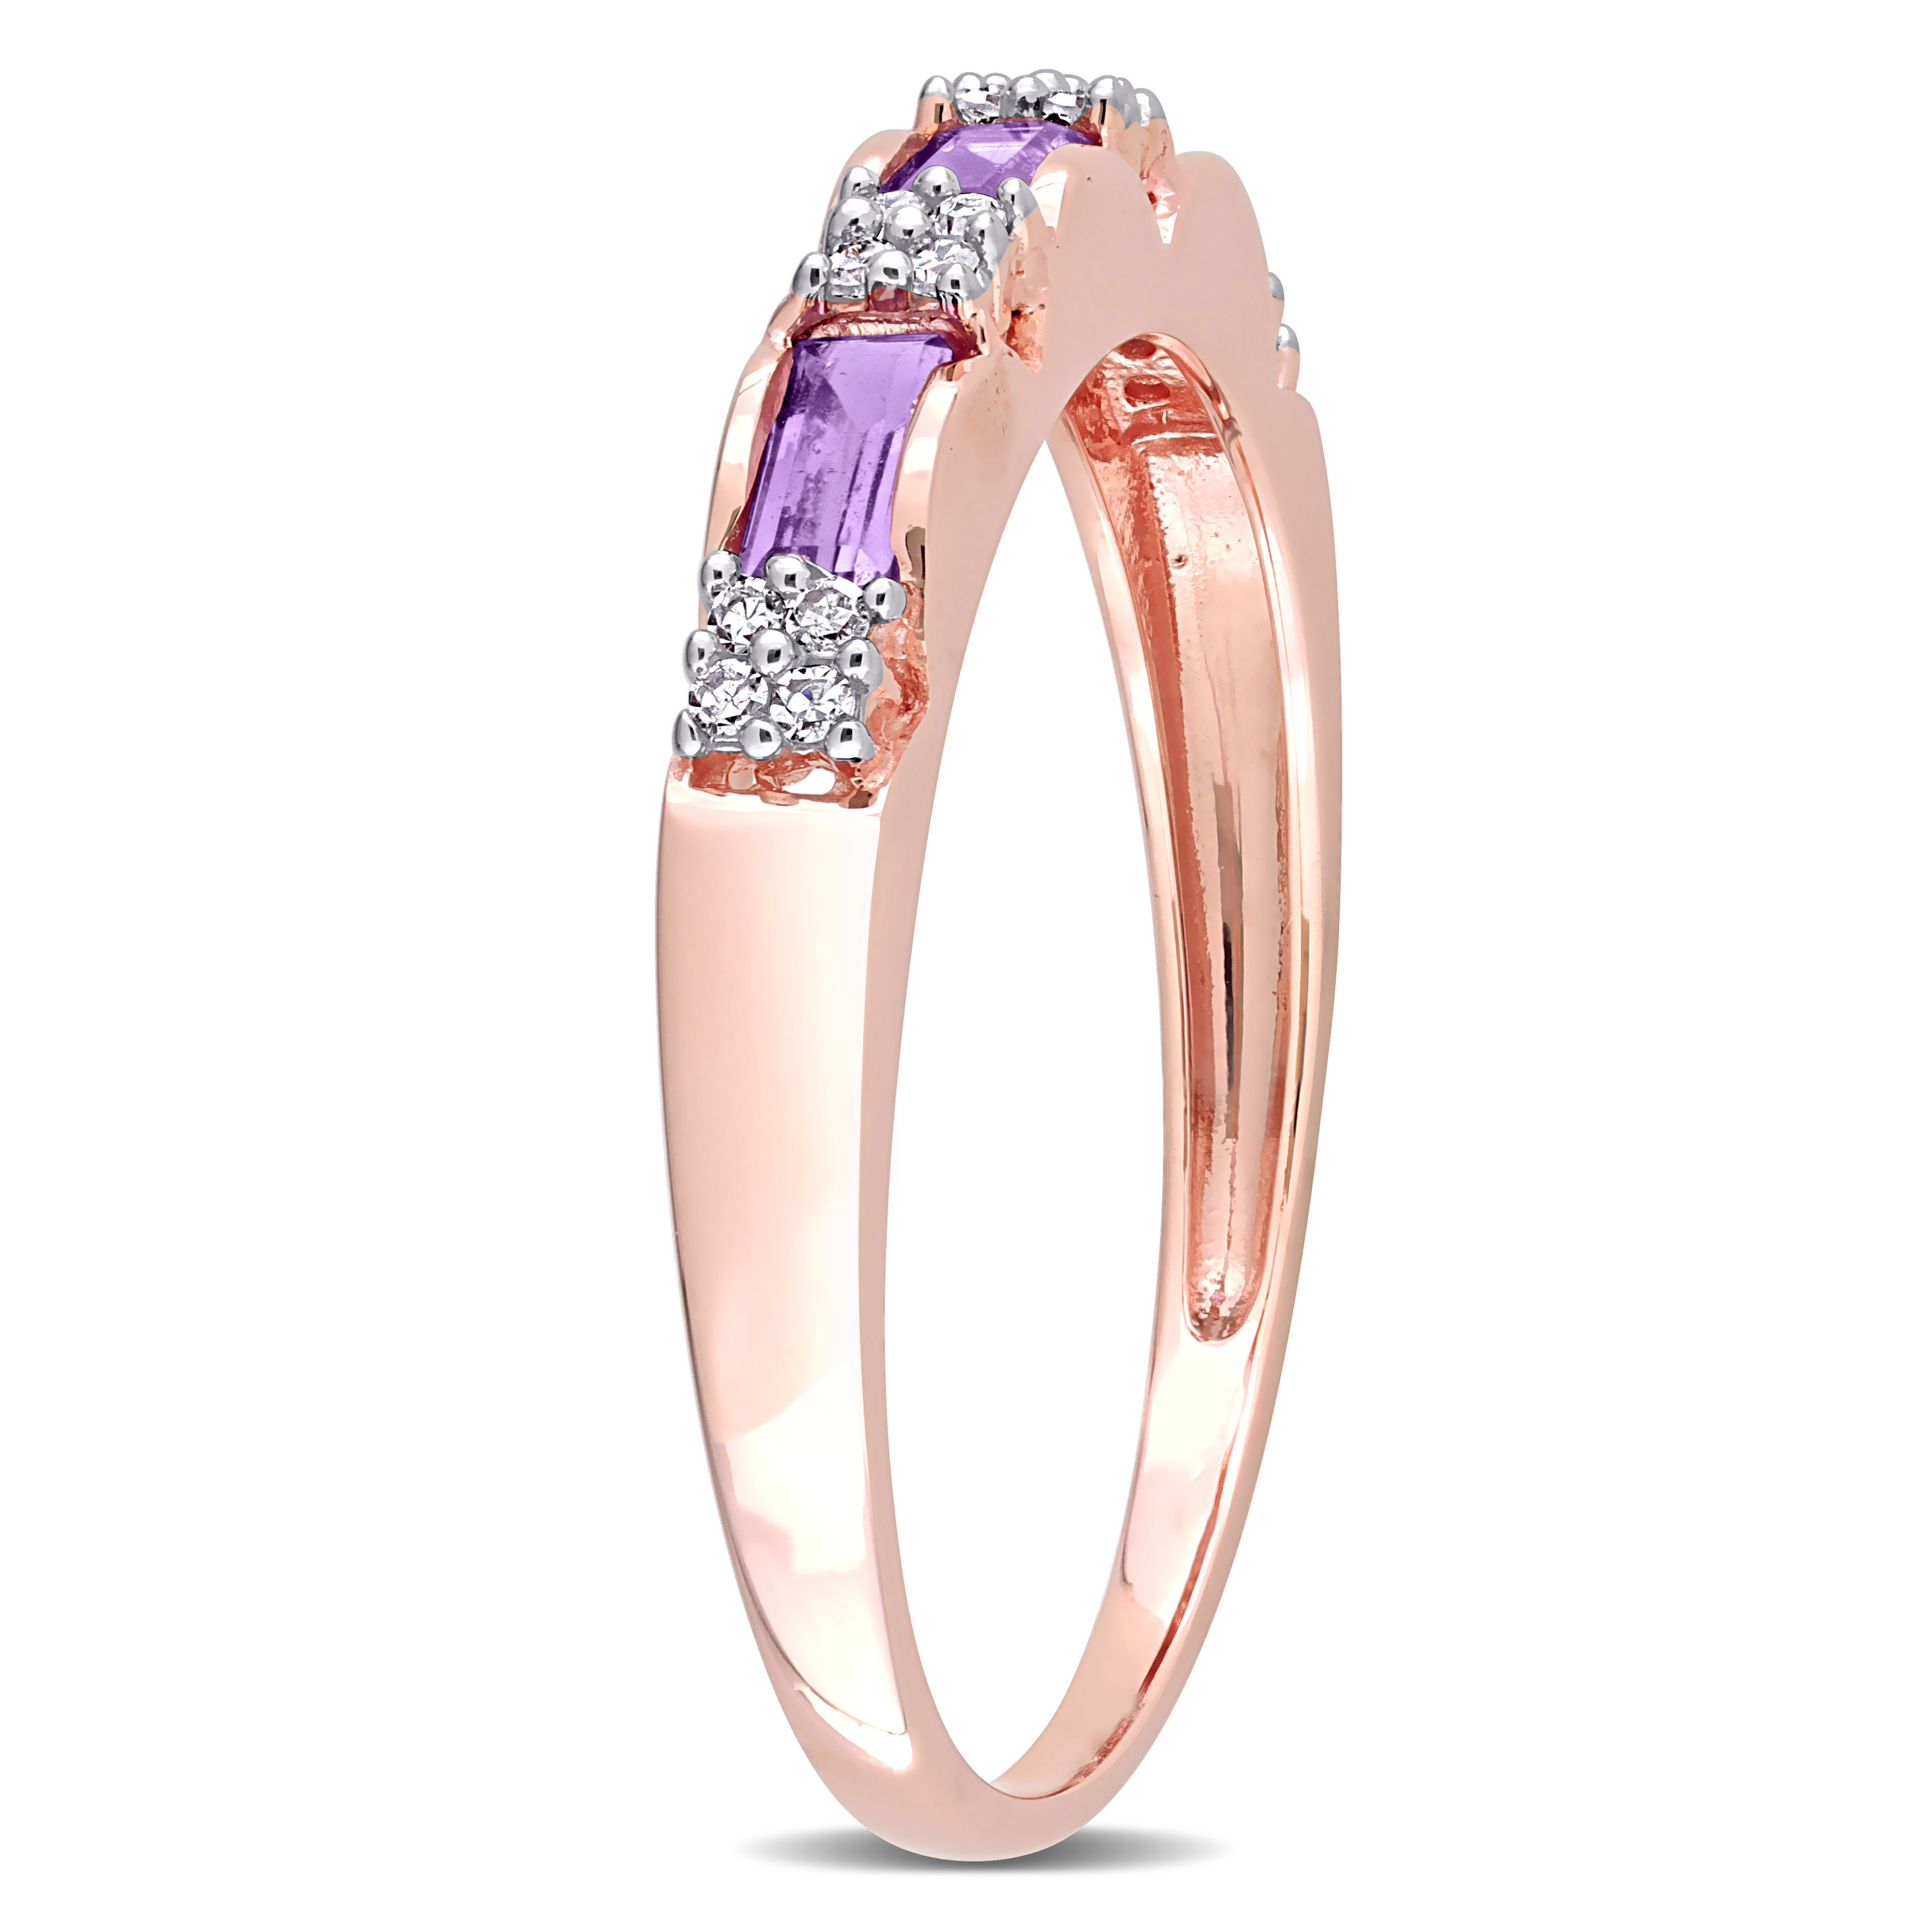 1/4 CT TGW Amethyst and Diamond Accent Eternity Ring in 10k Rose Gold